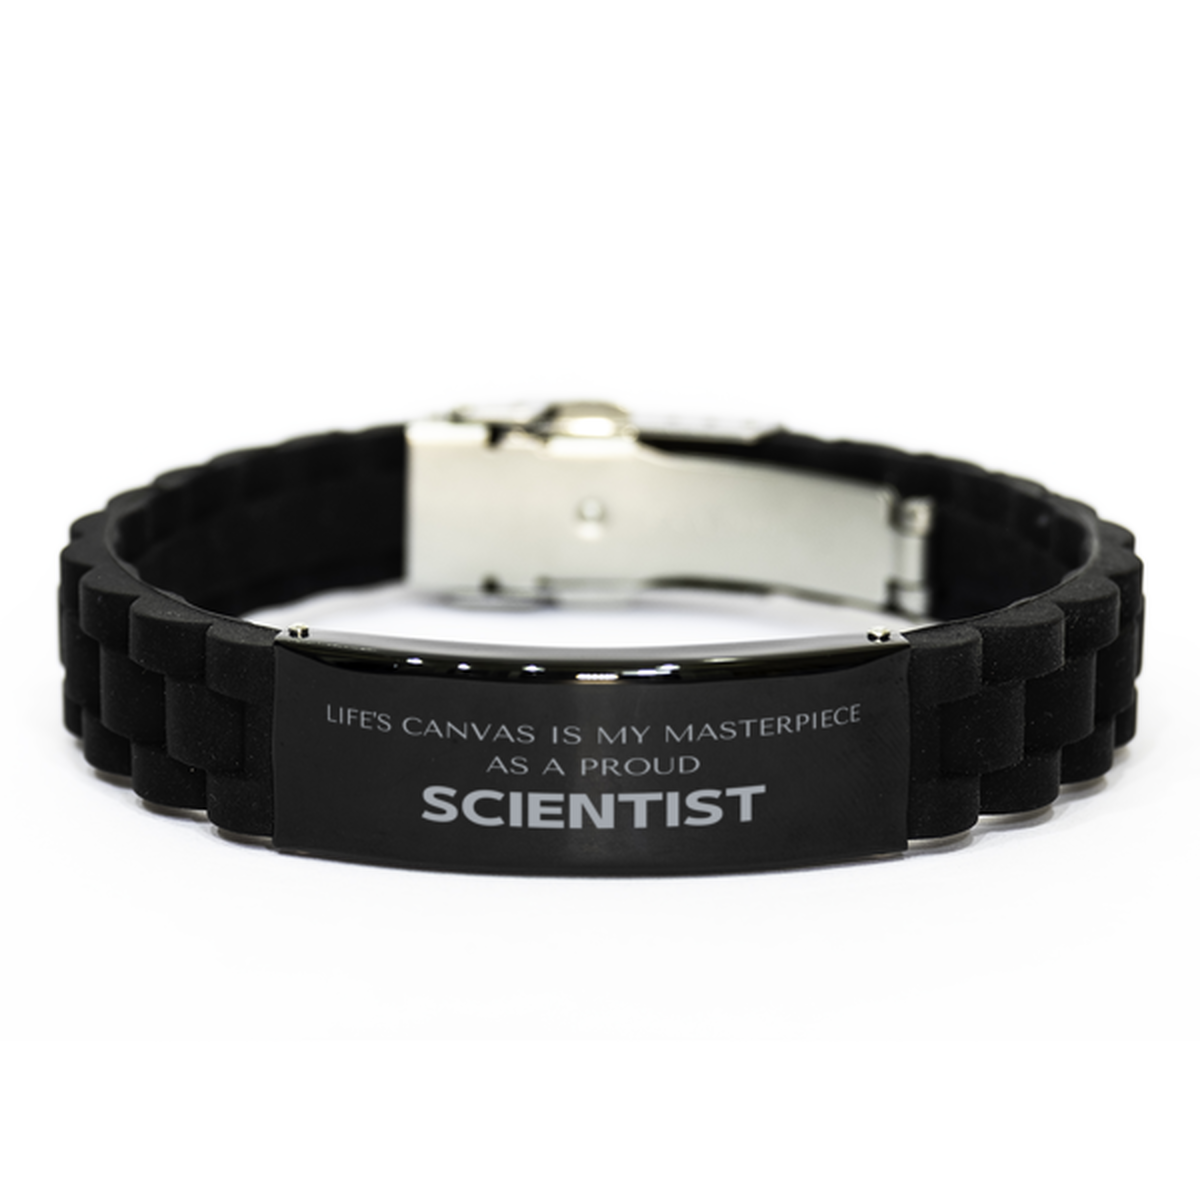 Proud Scientist Gifts, Life's canvas is my masterpiece, Epic Birthday Christmas Unique Black Glidelock Clasp Bracelet For Scientist, Coworkers, Men, Women, Friends